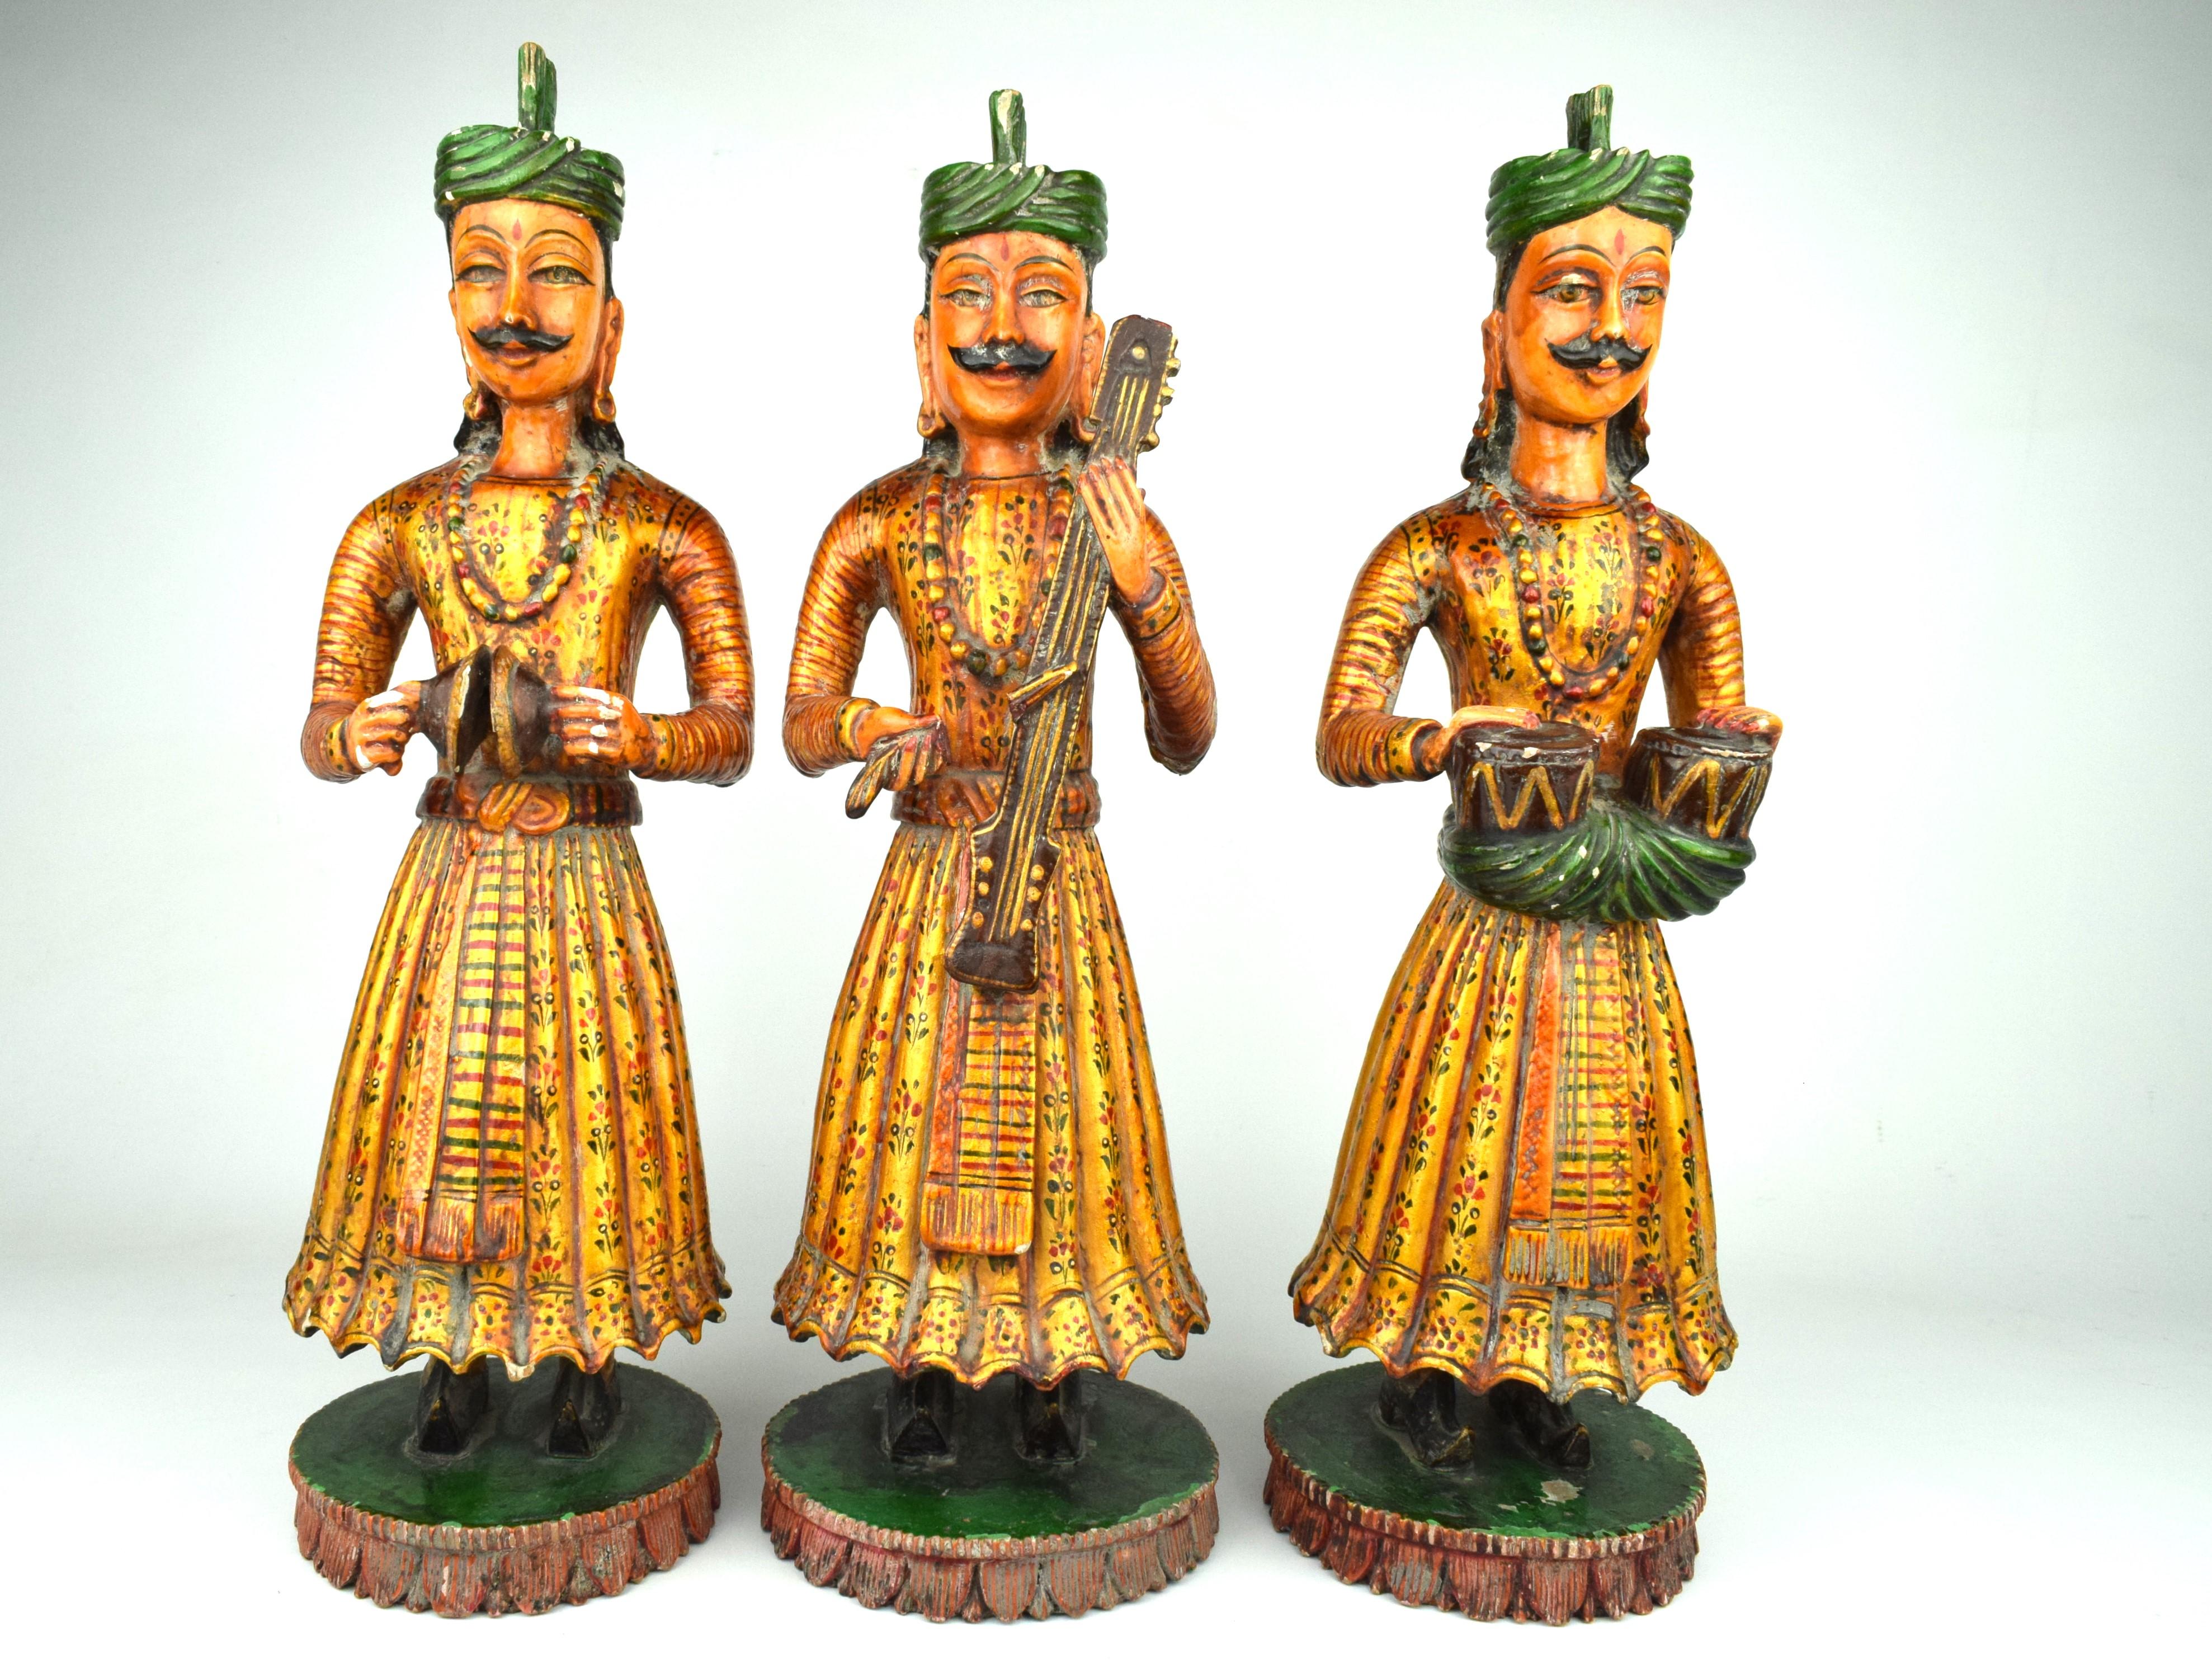 The group of three Rajasthani wooden musician figurines are a stunning example of traditional Indian craftsmanship. These intricately detailed and beautifully crafted sculptures are hand-carved from wood, showcasing the exceptional skills and